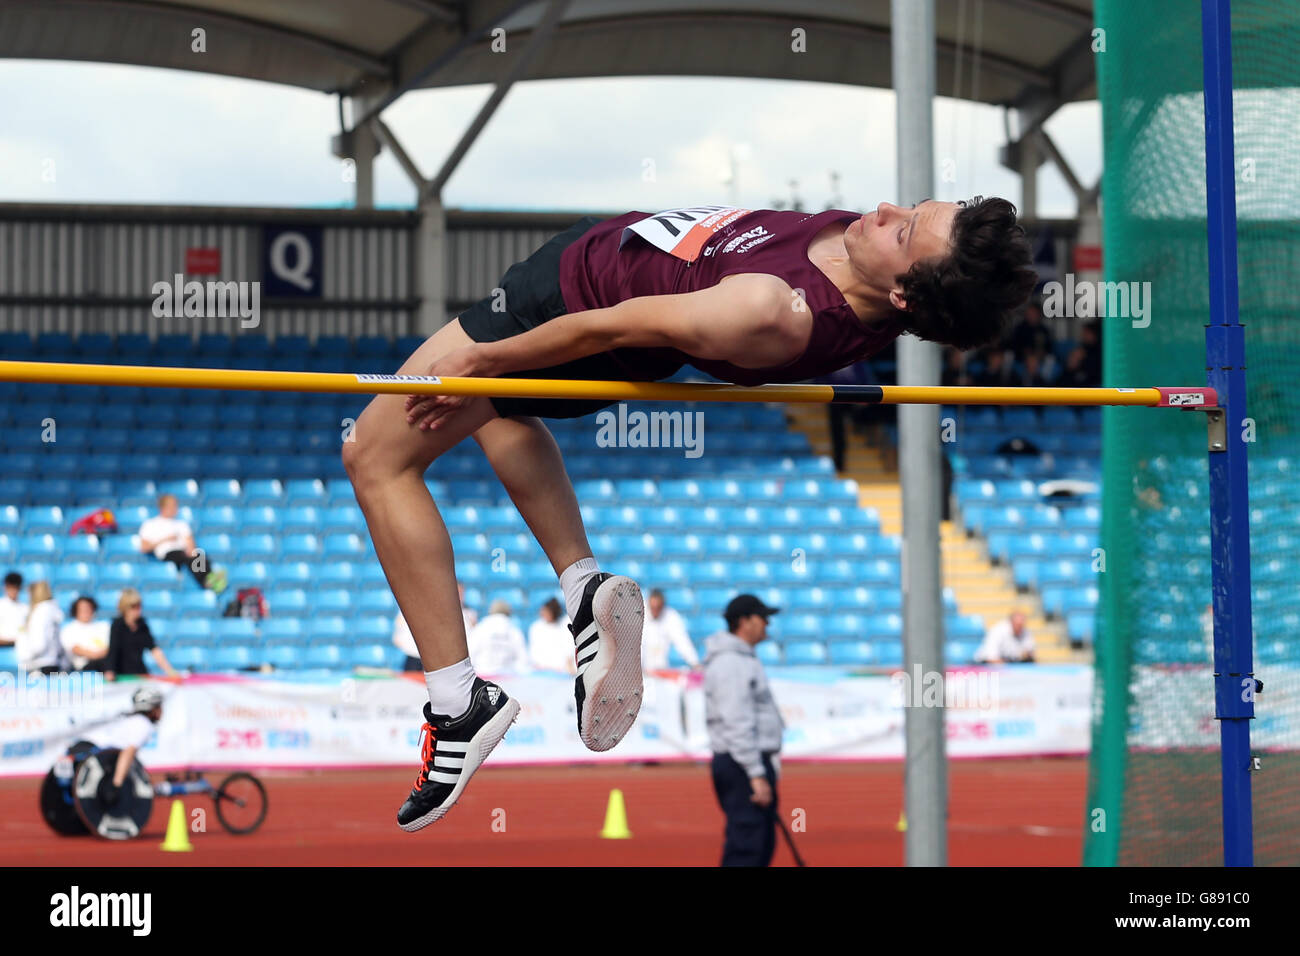 Sport - Sainsbury's 2015 School Games - Day Two - Manchester. England North West's Steven Jones takes part in the boys high jump at the Sainsbury's 2015 School Games at the Manchester Regional Arena. Stock Photo